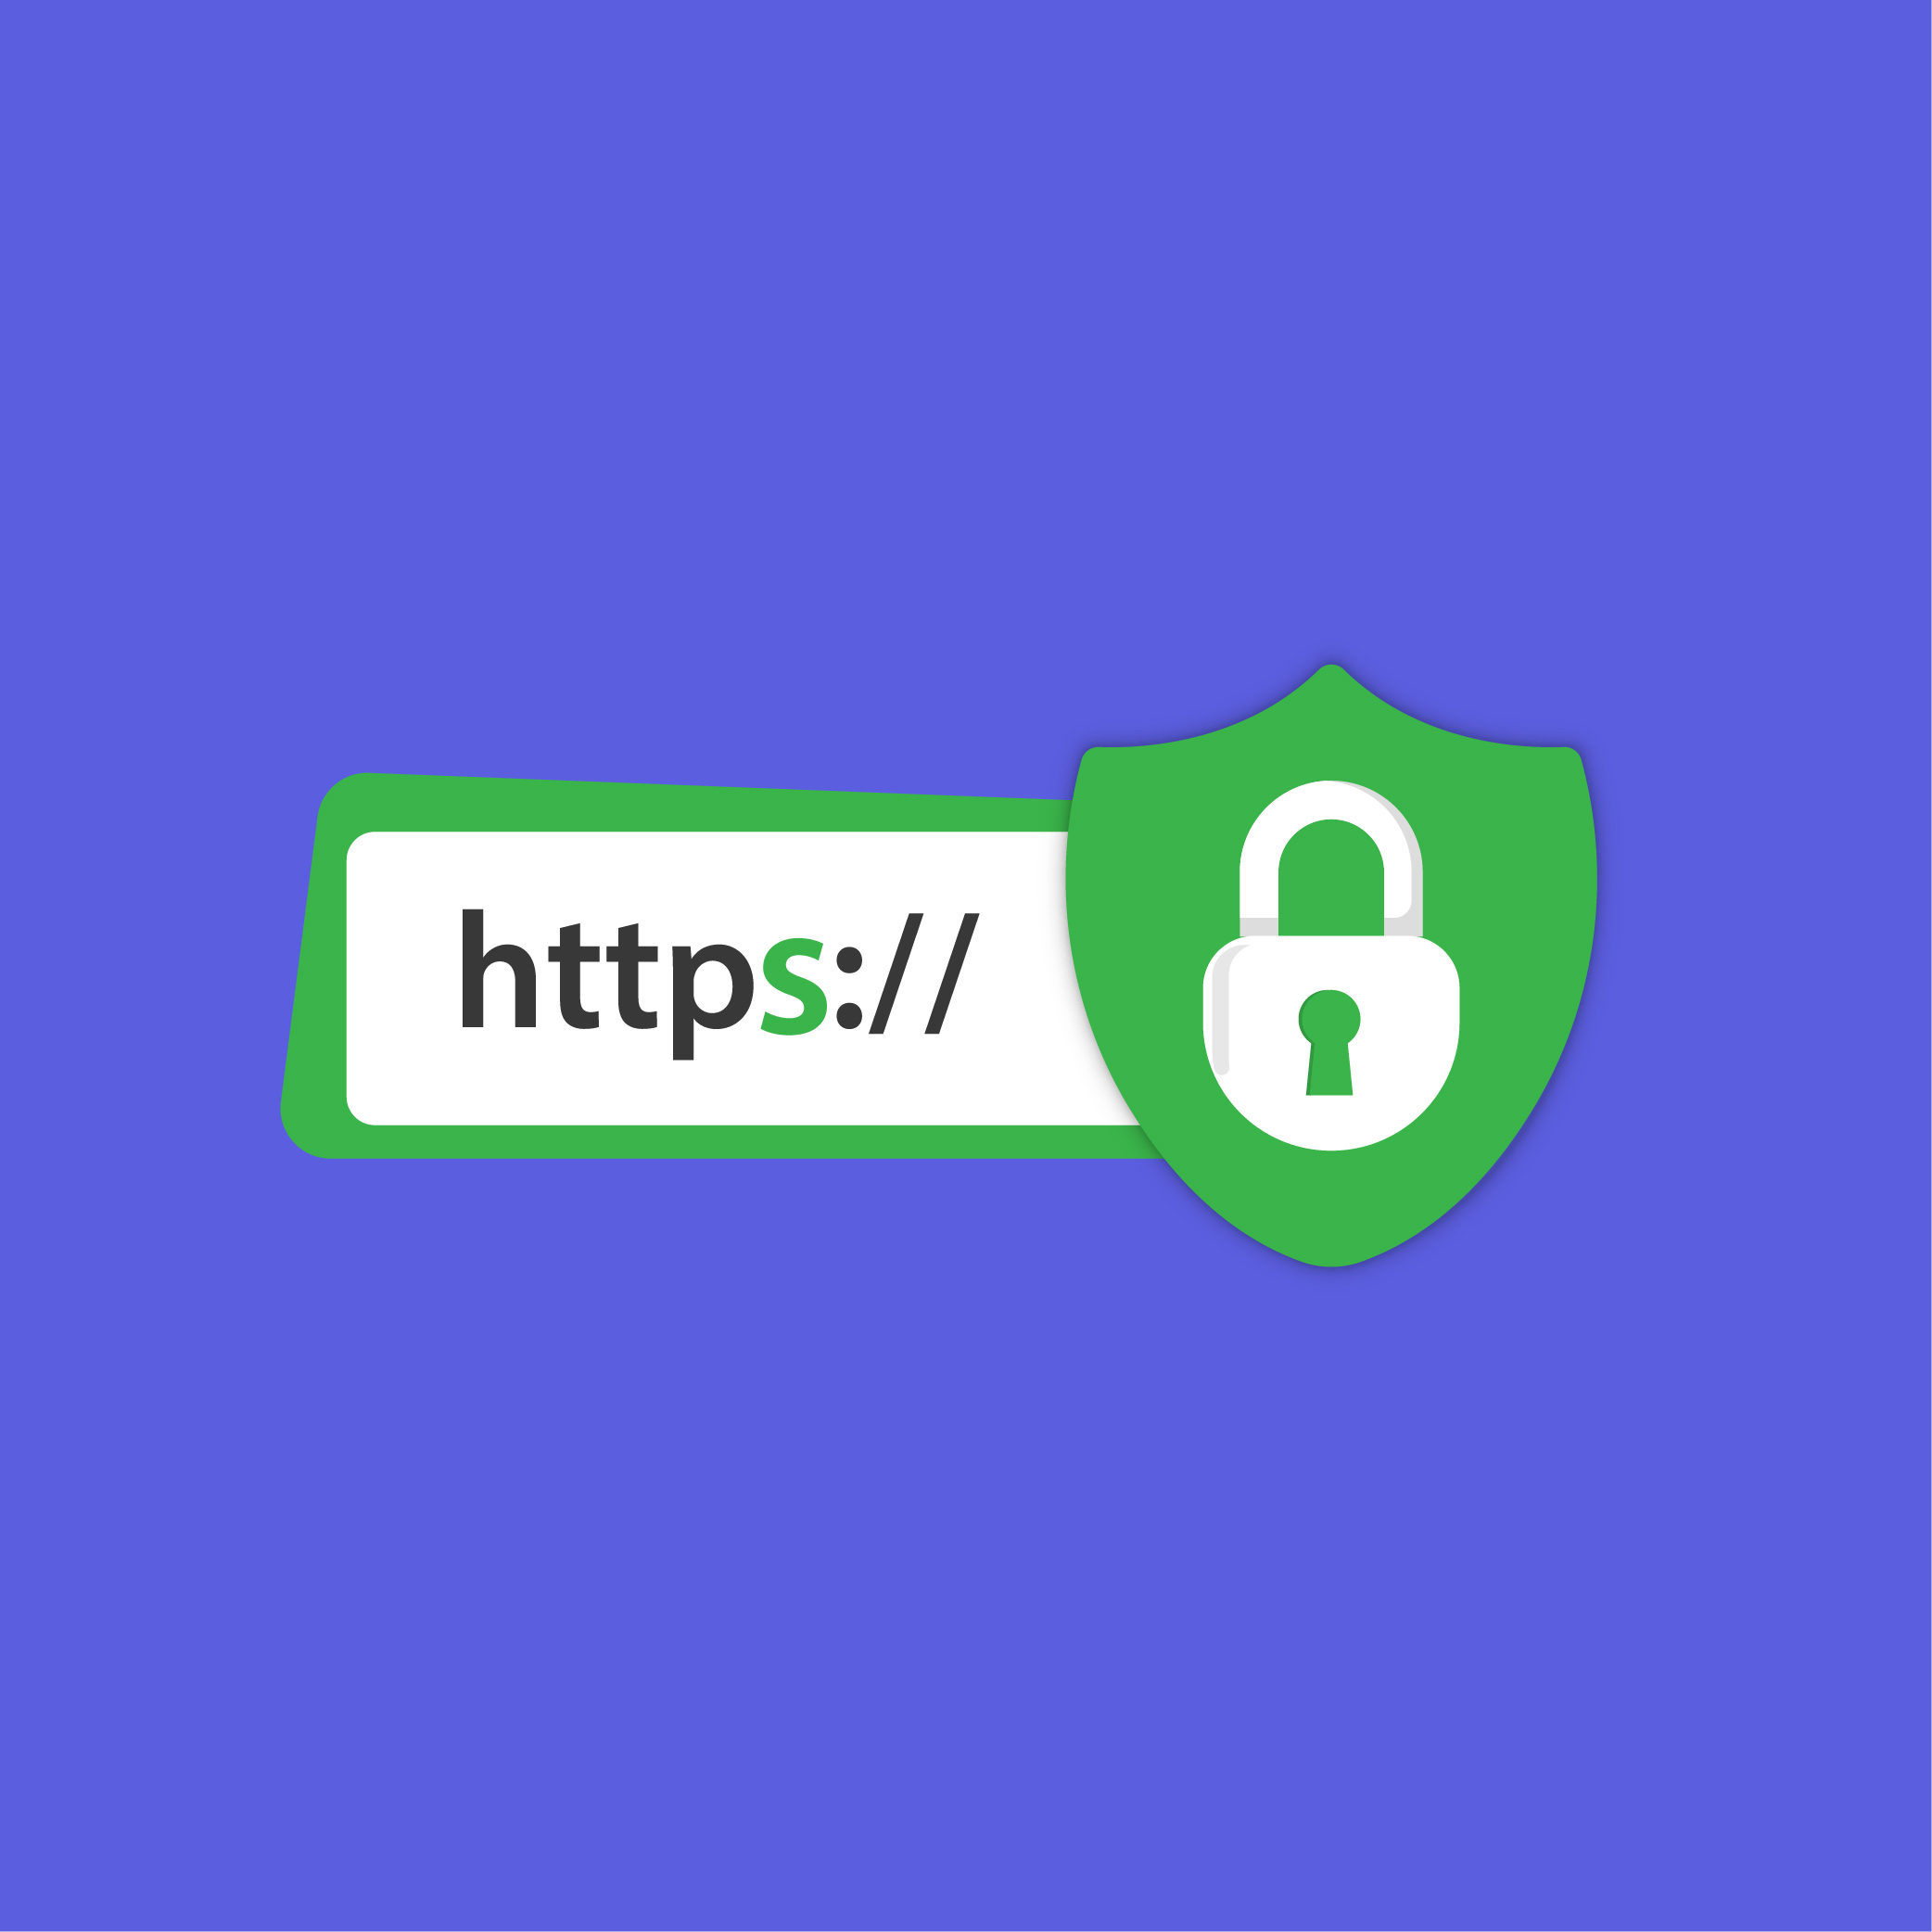 Does Your Site Need an SSL Certificates